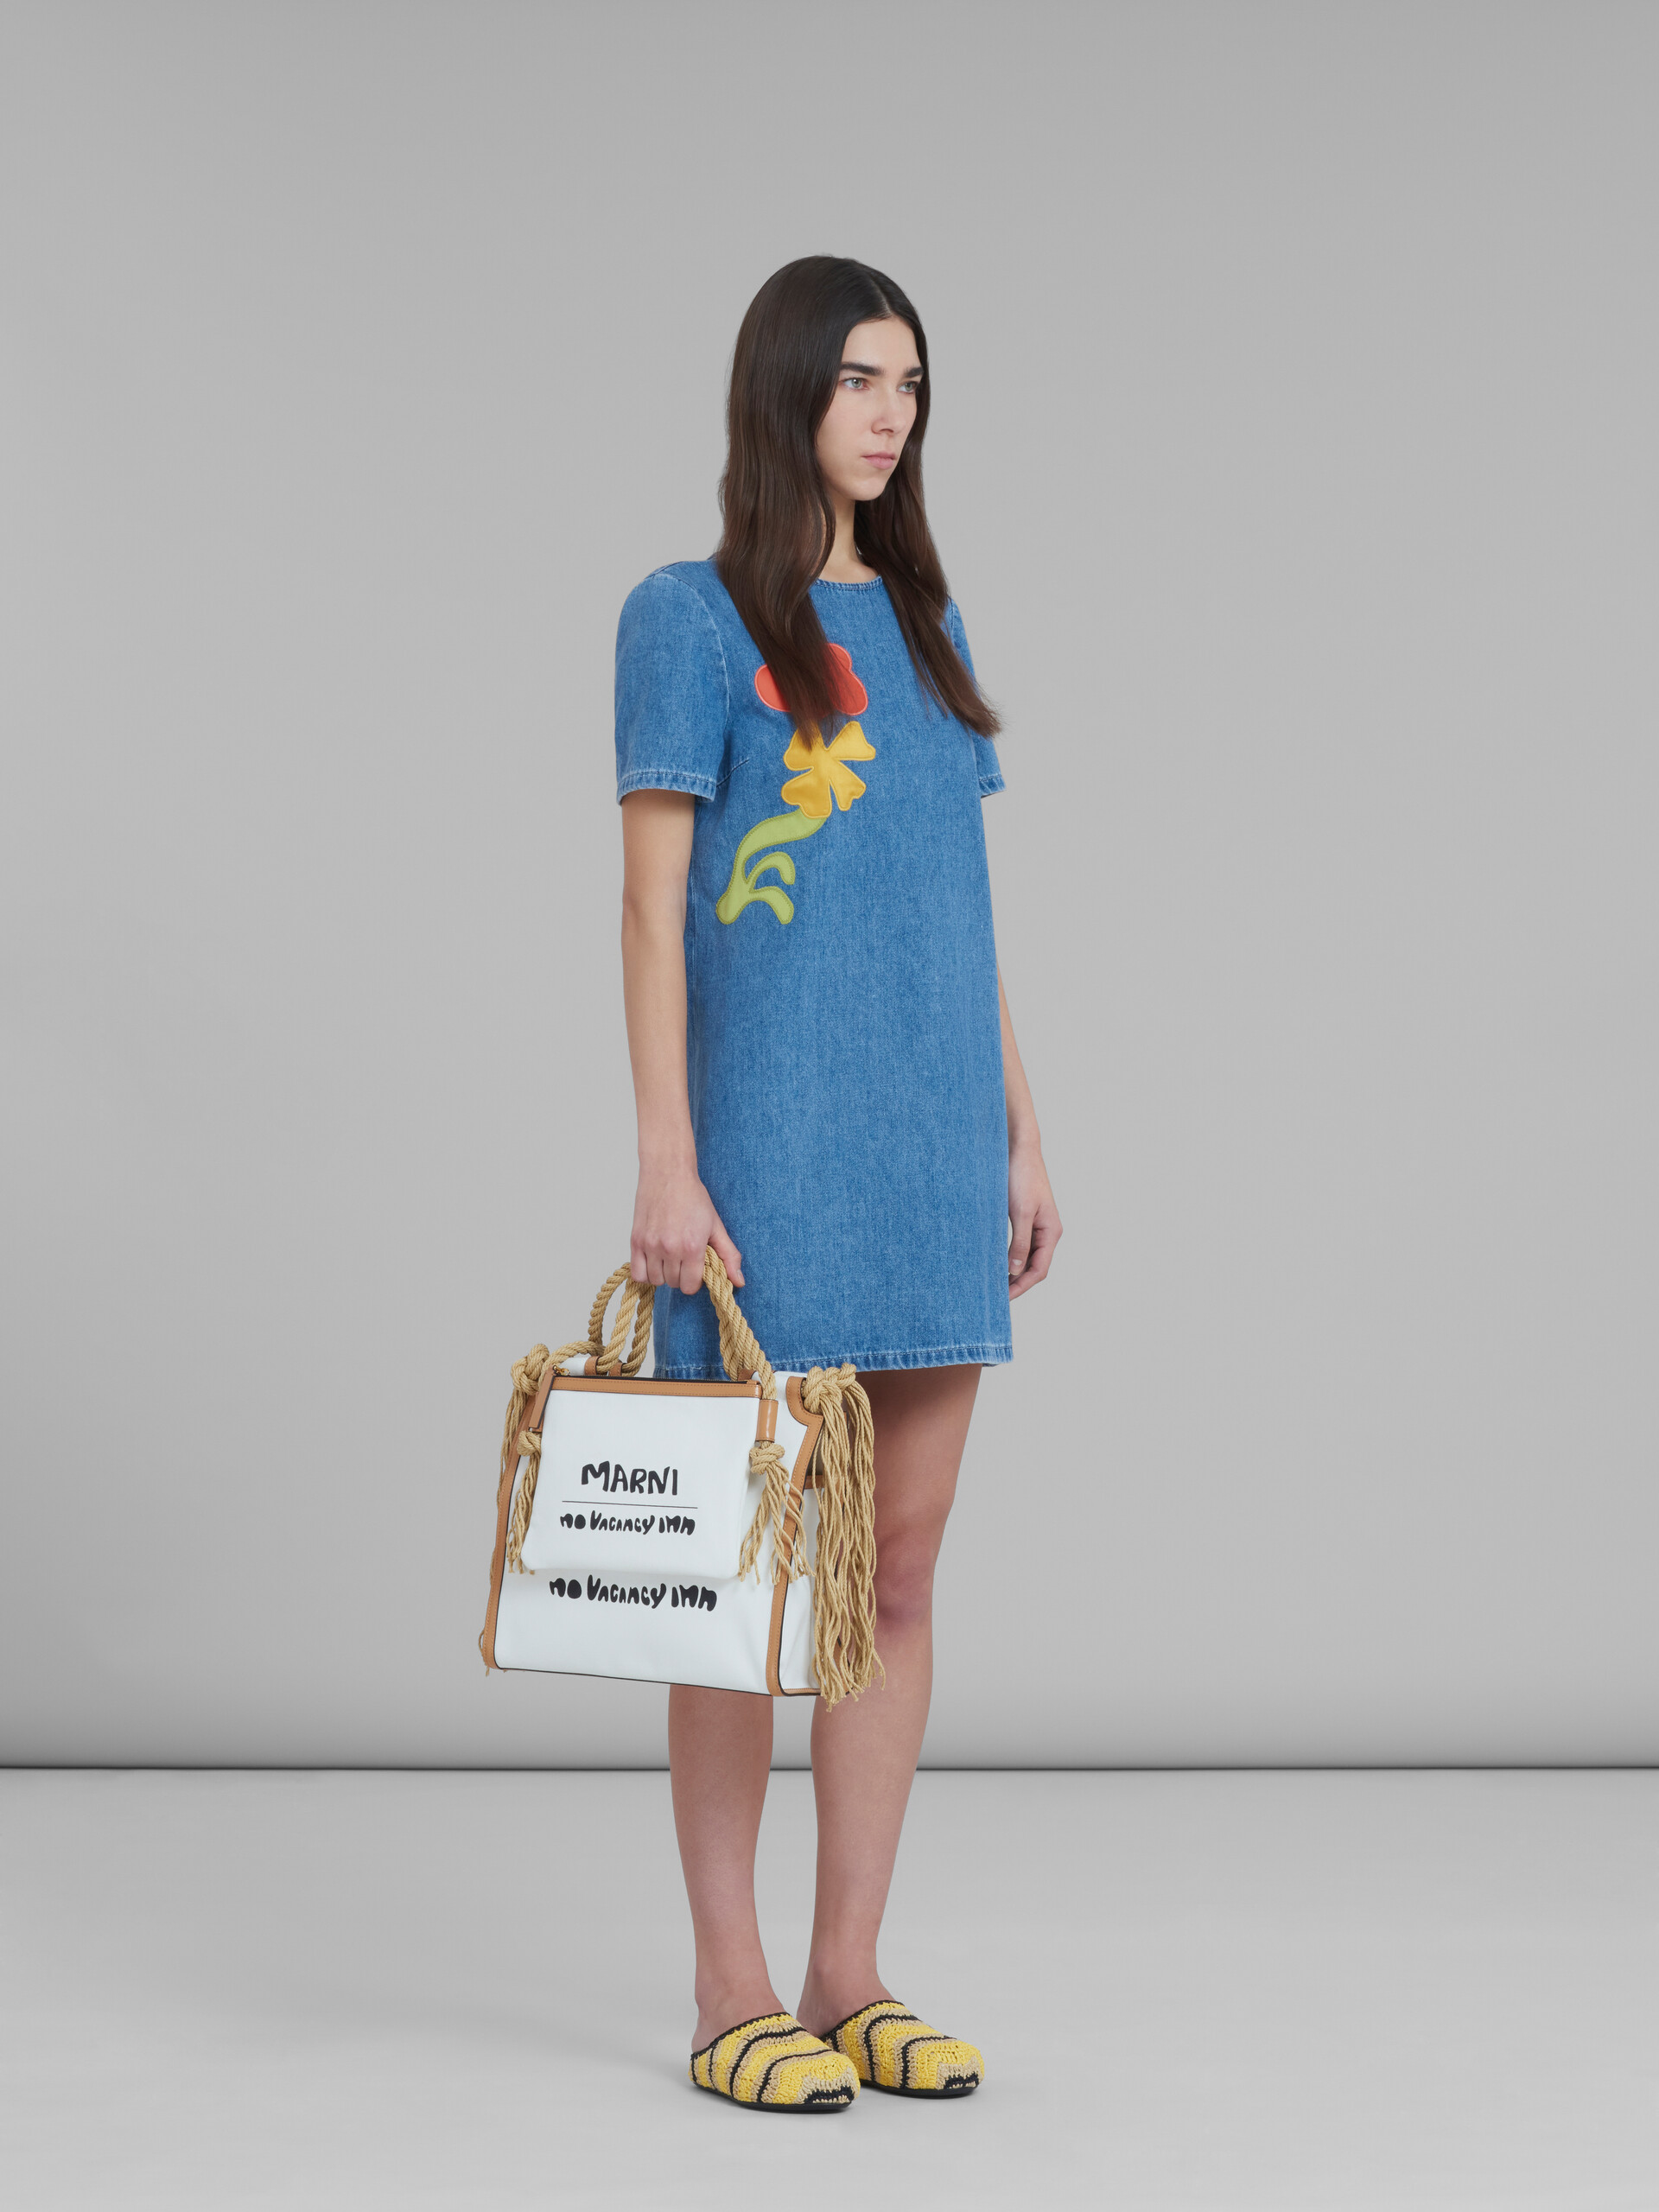 Marni x No Vacancy Inn - Blue chambray short dress with embroidery - Dresses - Image 6